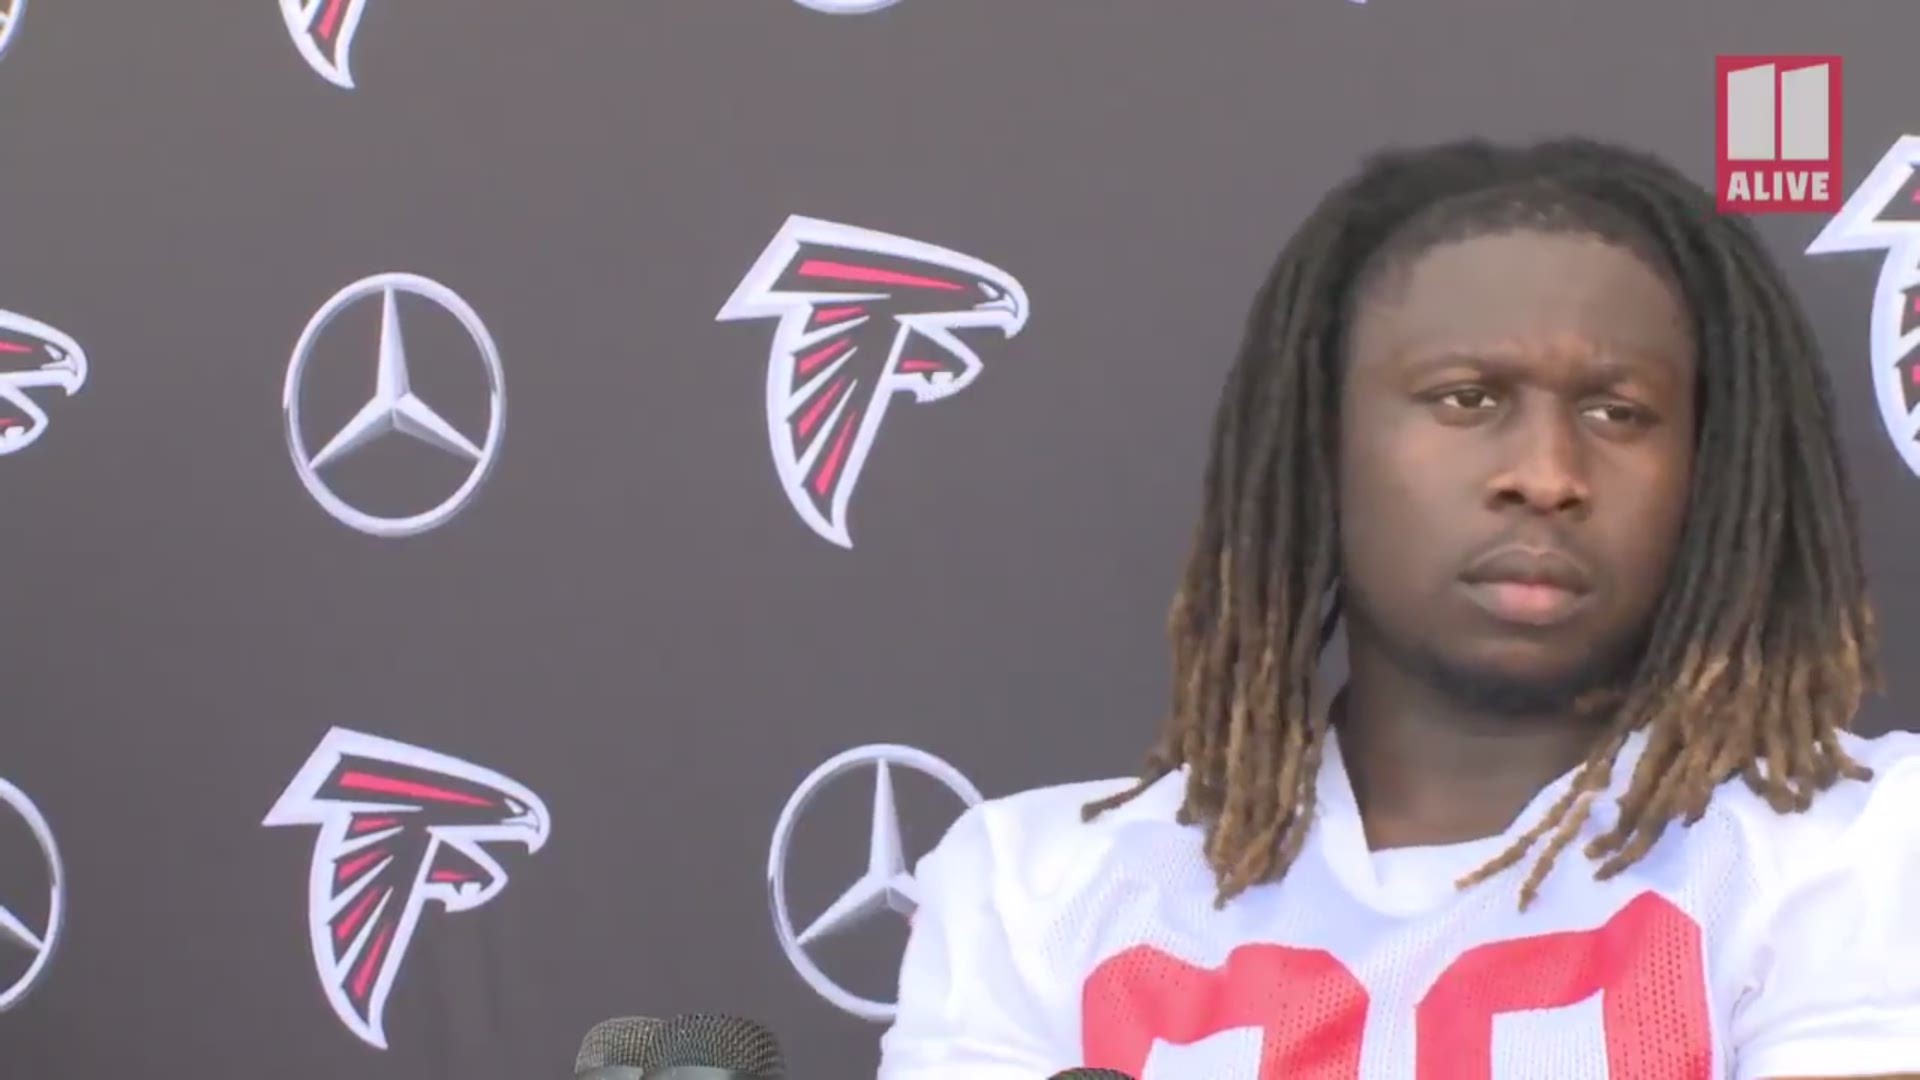 The defensive end made that clear while speaking with reporters during a media availability at the Falcons' organized team activities in Flowery Branch.